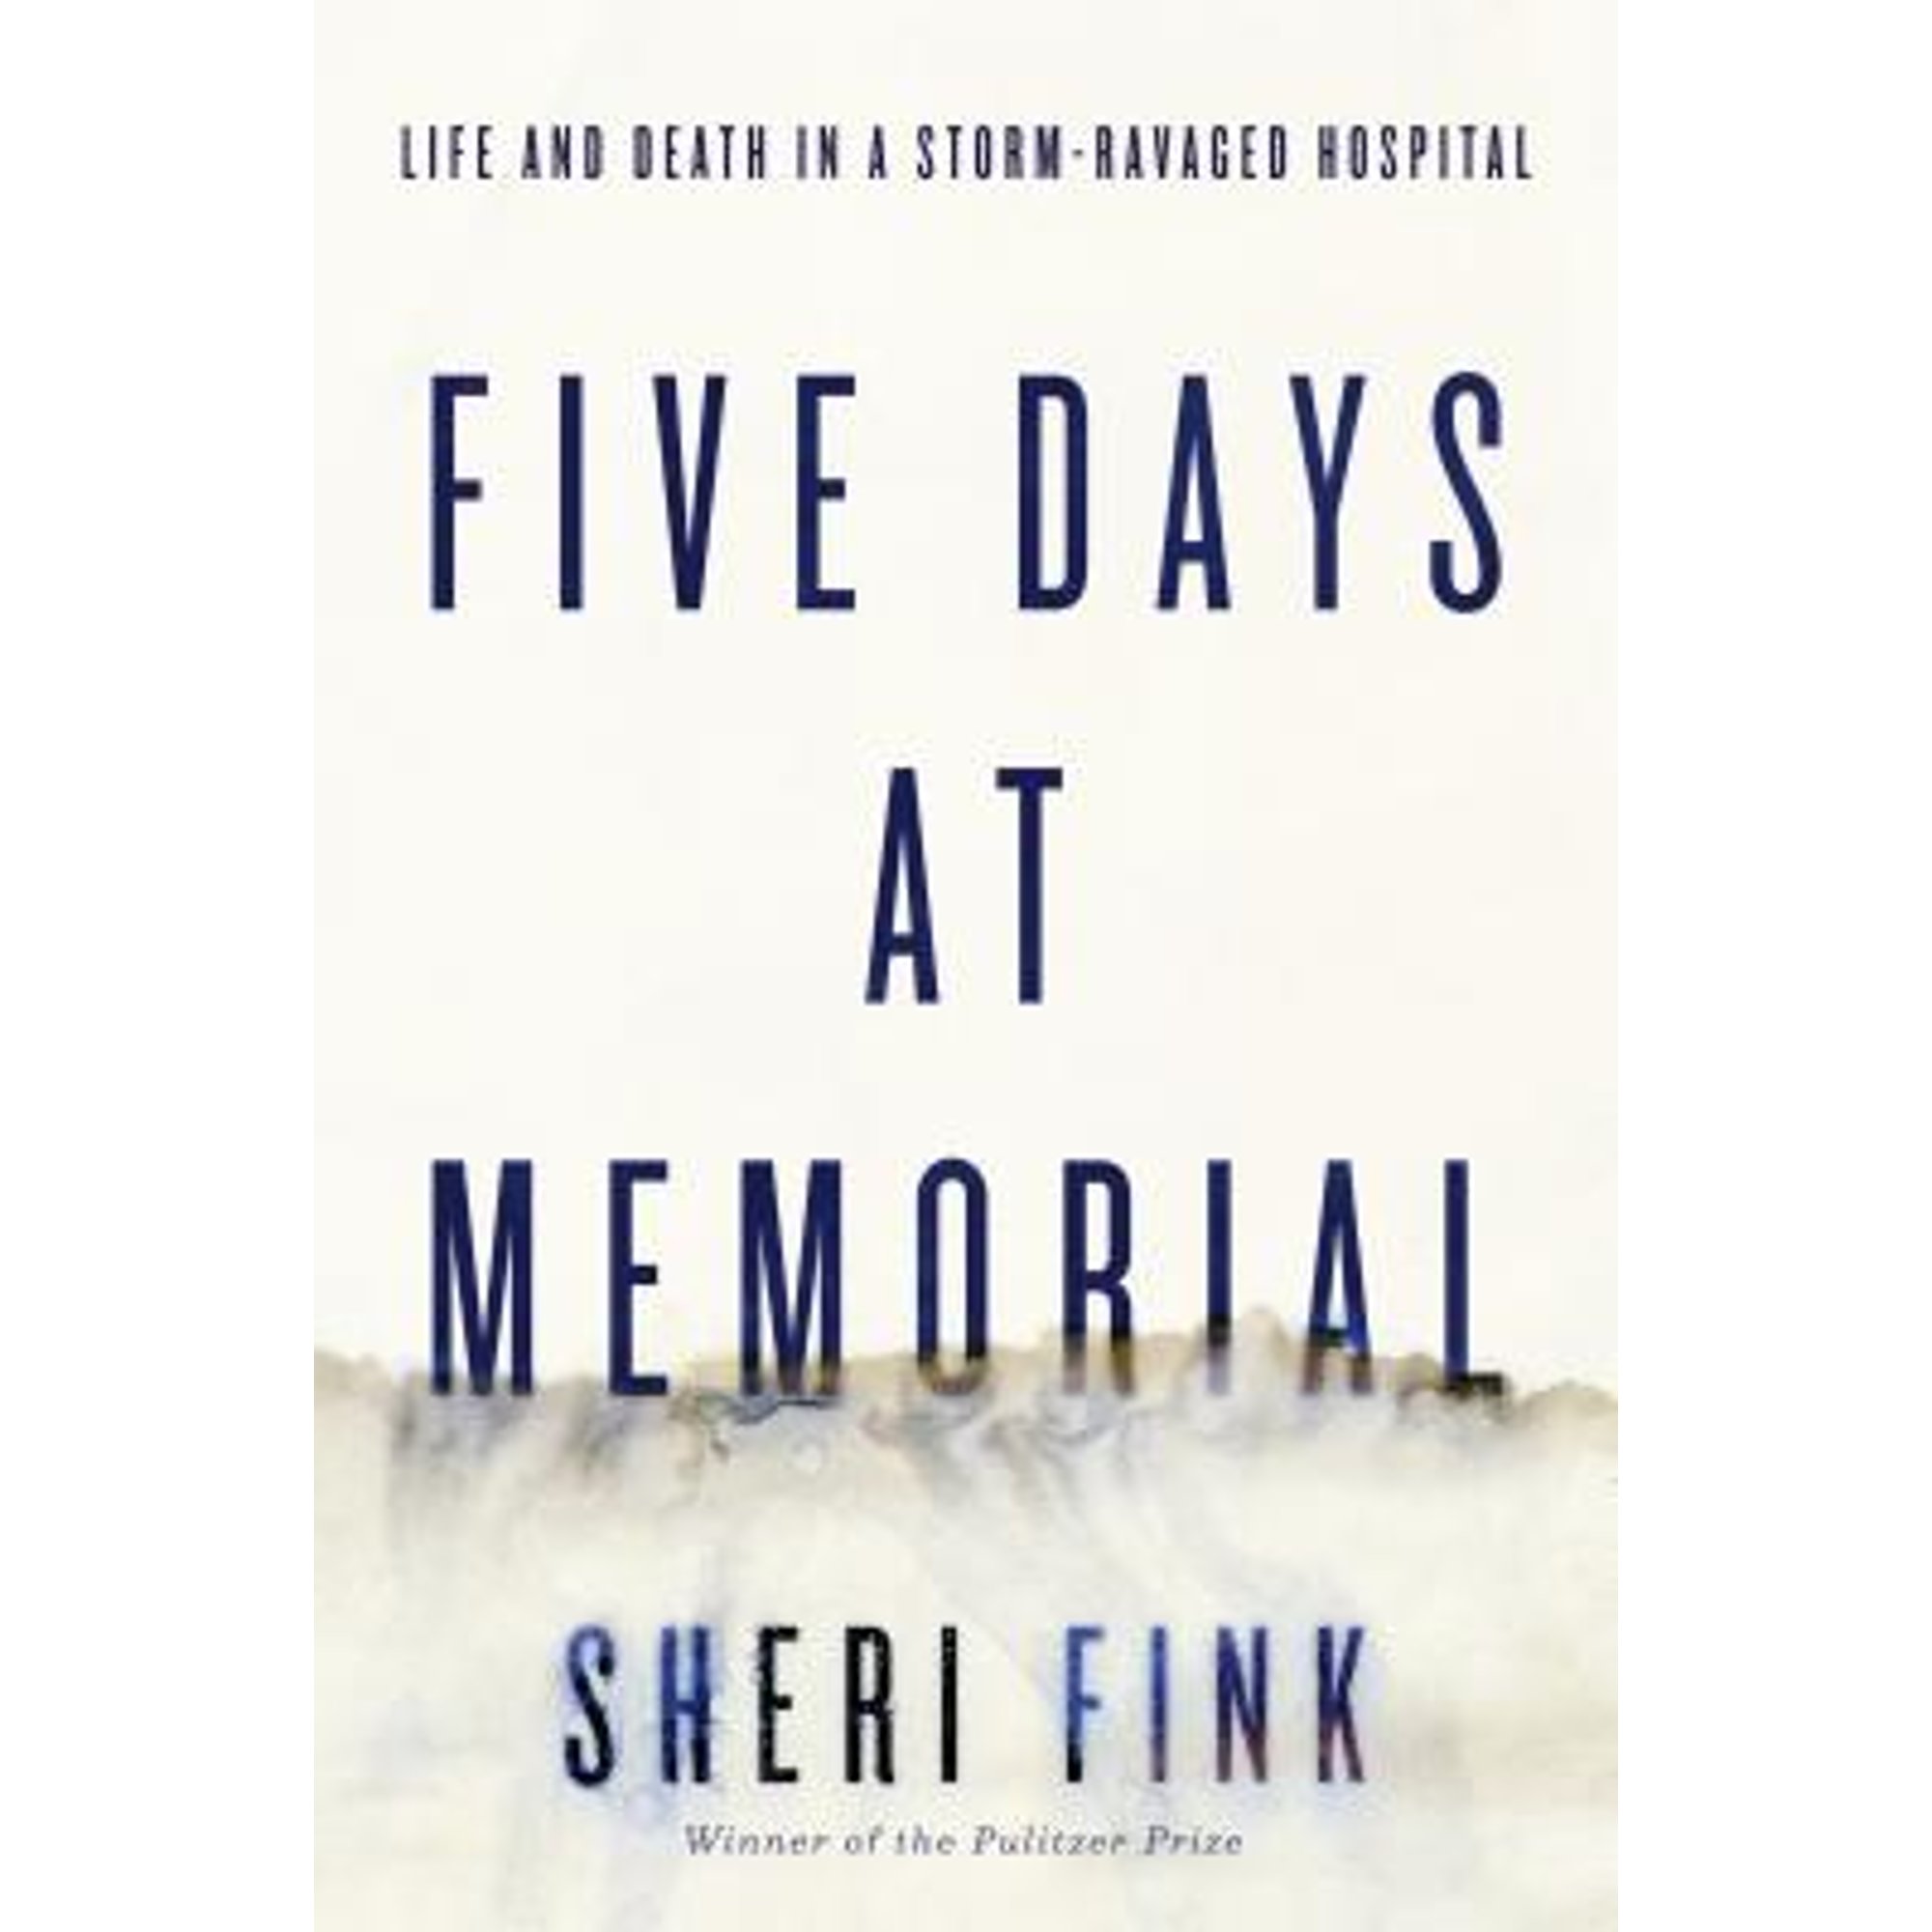 Five Days at Memorial: Life and Death in a Storm-Ravaged Hospital (Hardcover) by Sheri Fink - image 1 of 1